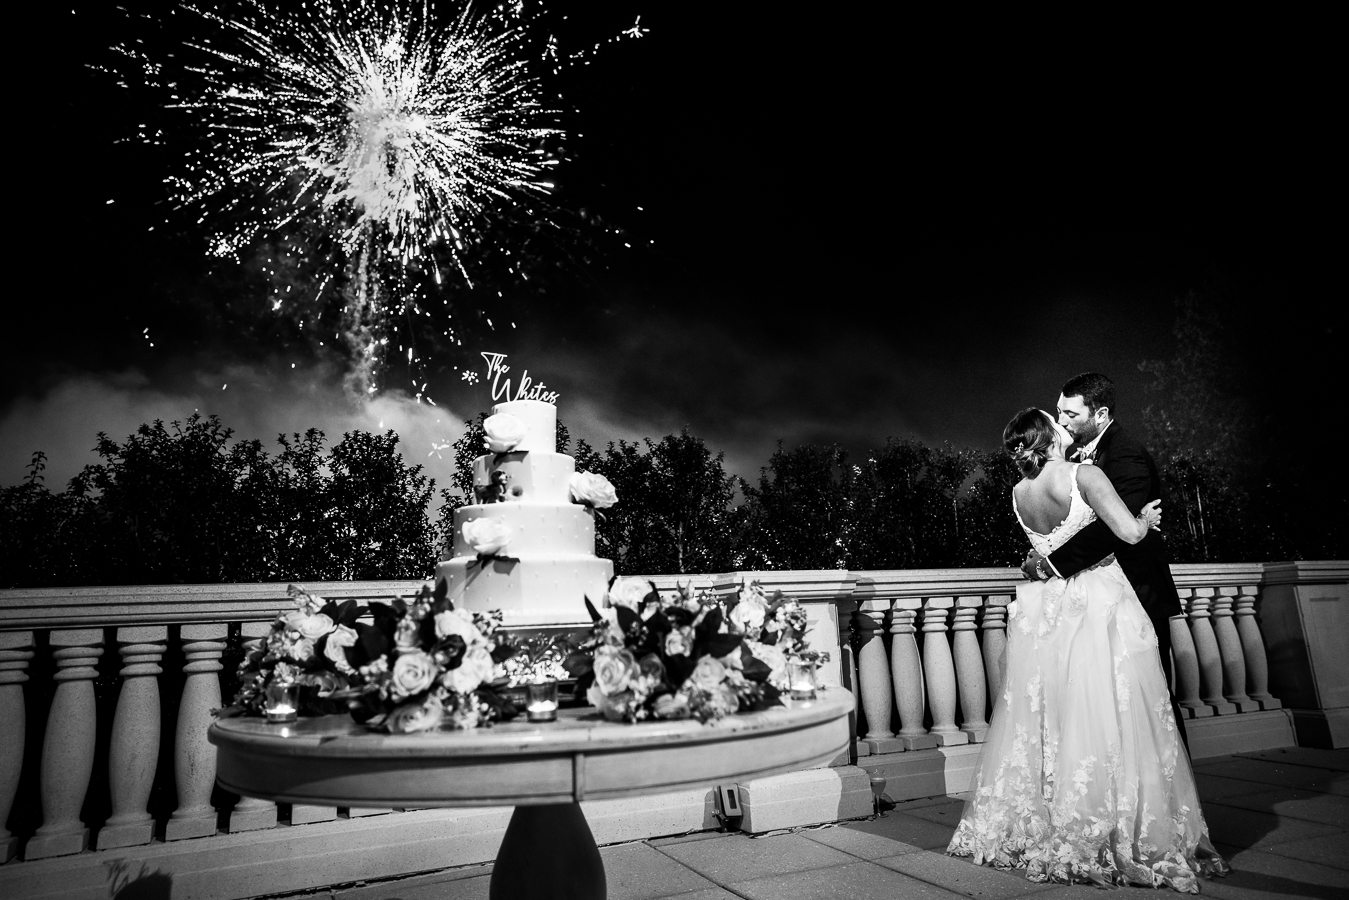 creative nj wedding photographer, lisa rhinehart, captures this spectacular shot of the bride and groom as they share a kiss during the firework display at their black and gold wedding reception at the palace at somerset park in NJ 